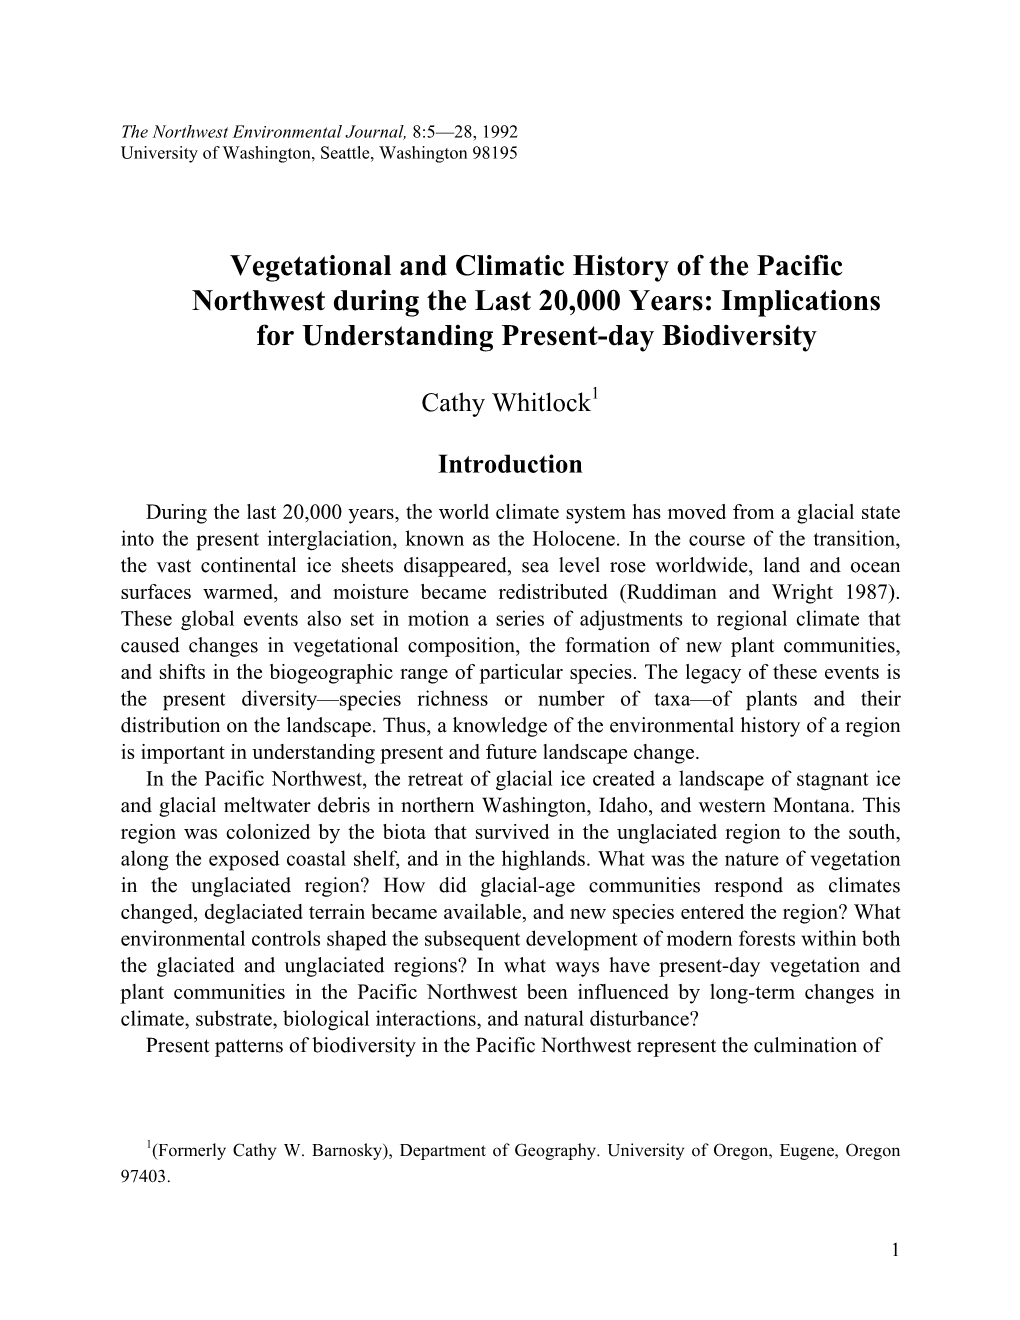 Vegetational and Climatic History of the Pacific Northwest During the Last 20,000 Years: Implications for Understanding Present-Day Biodiversity